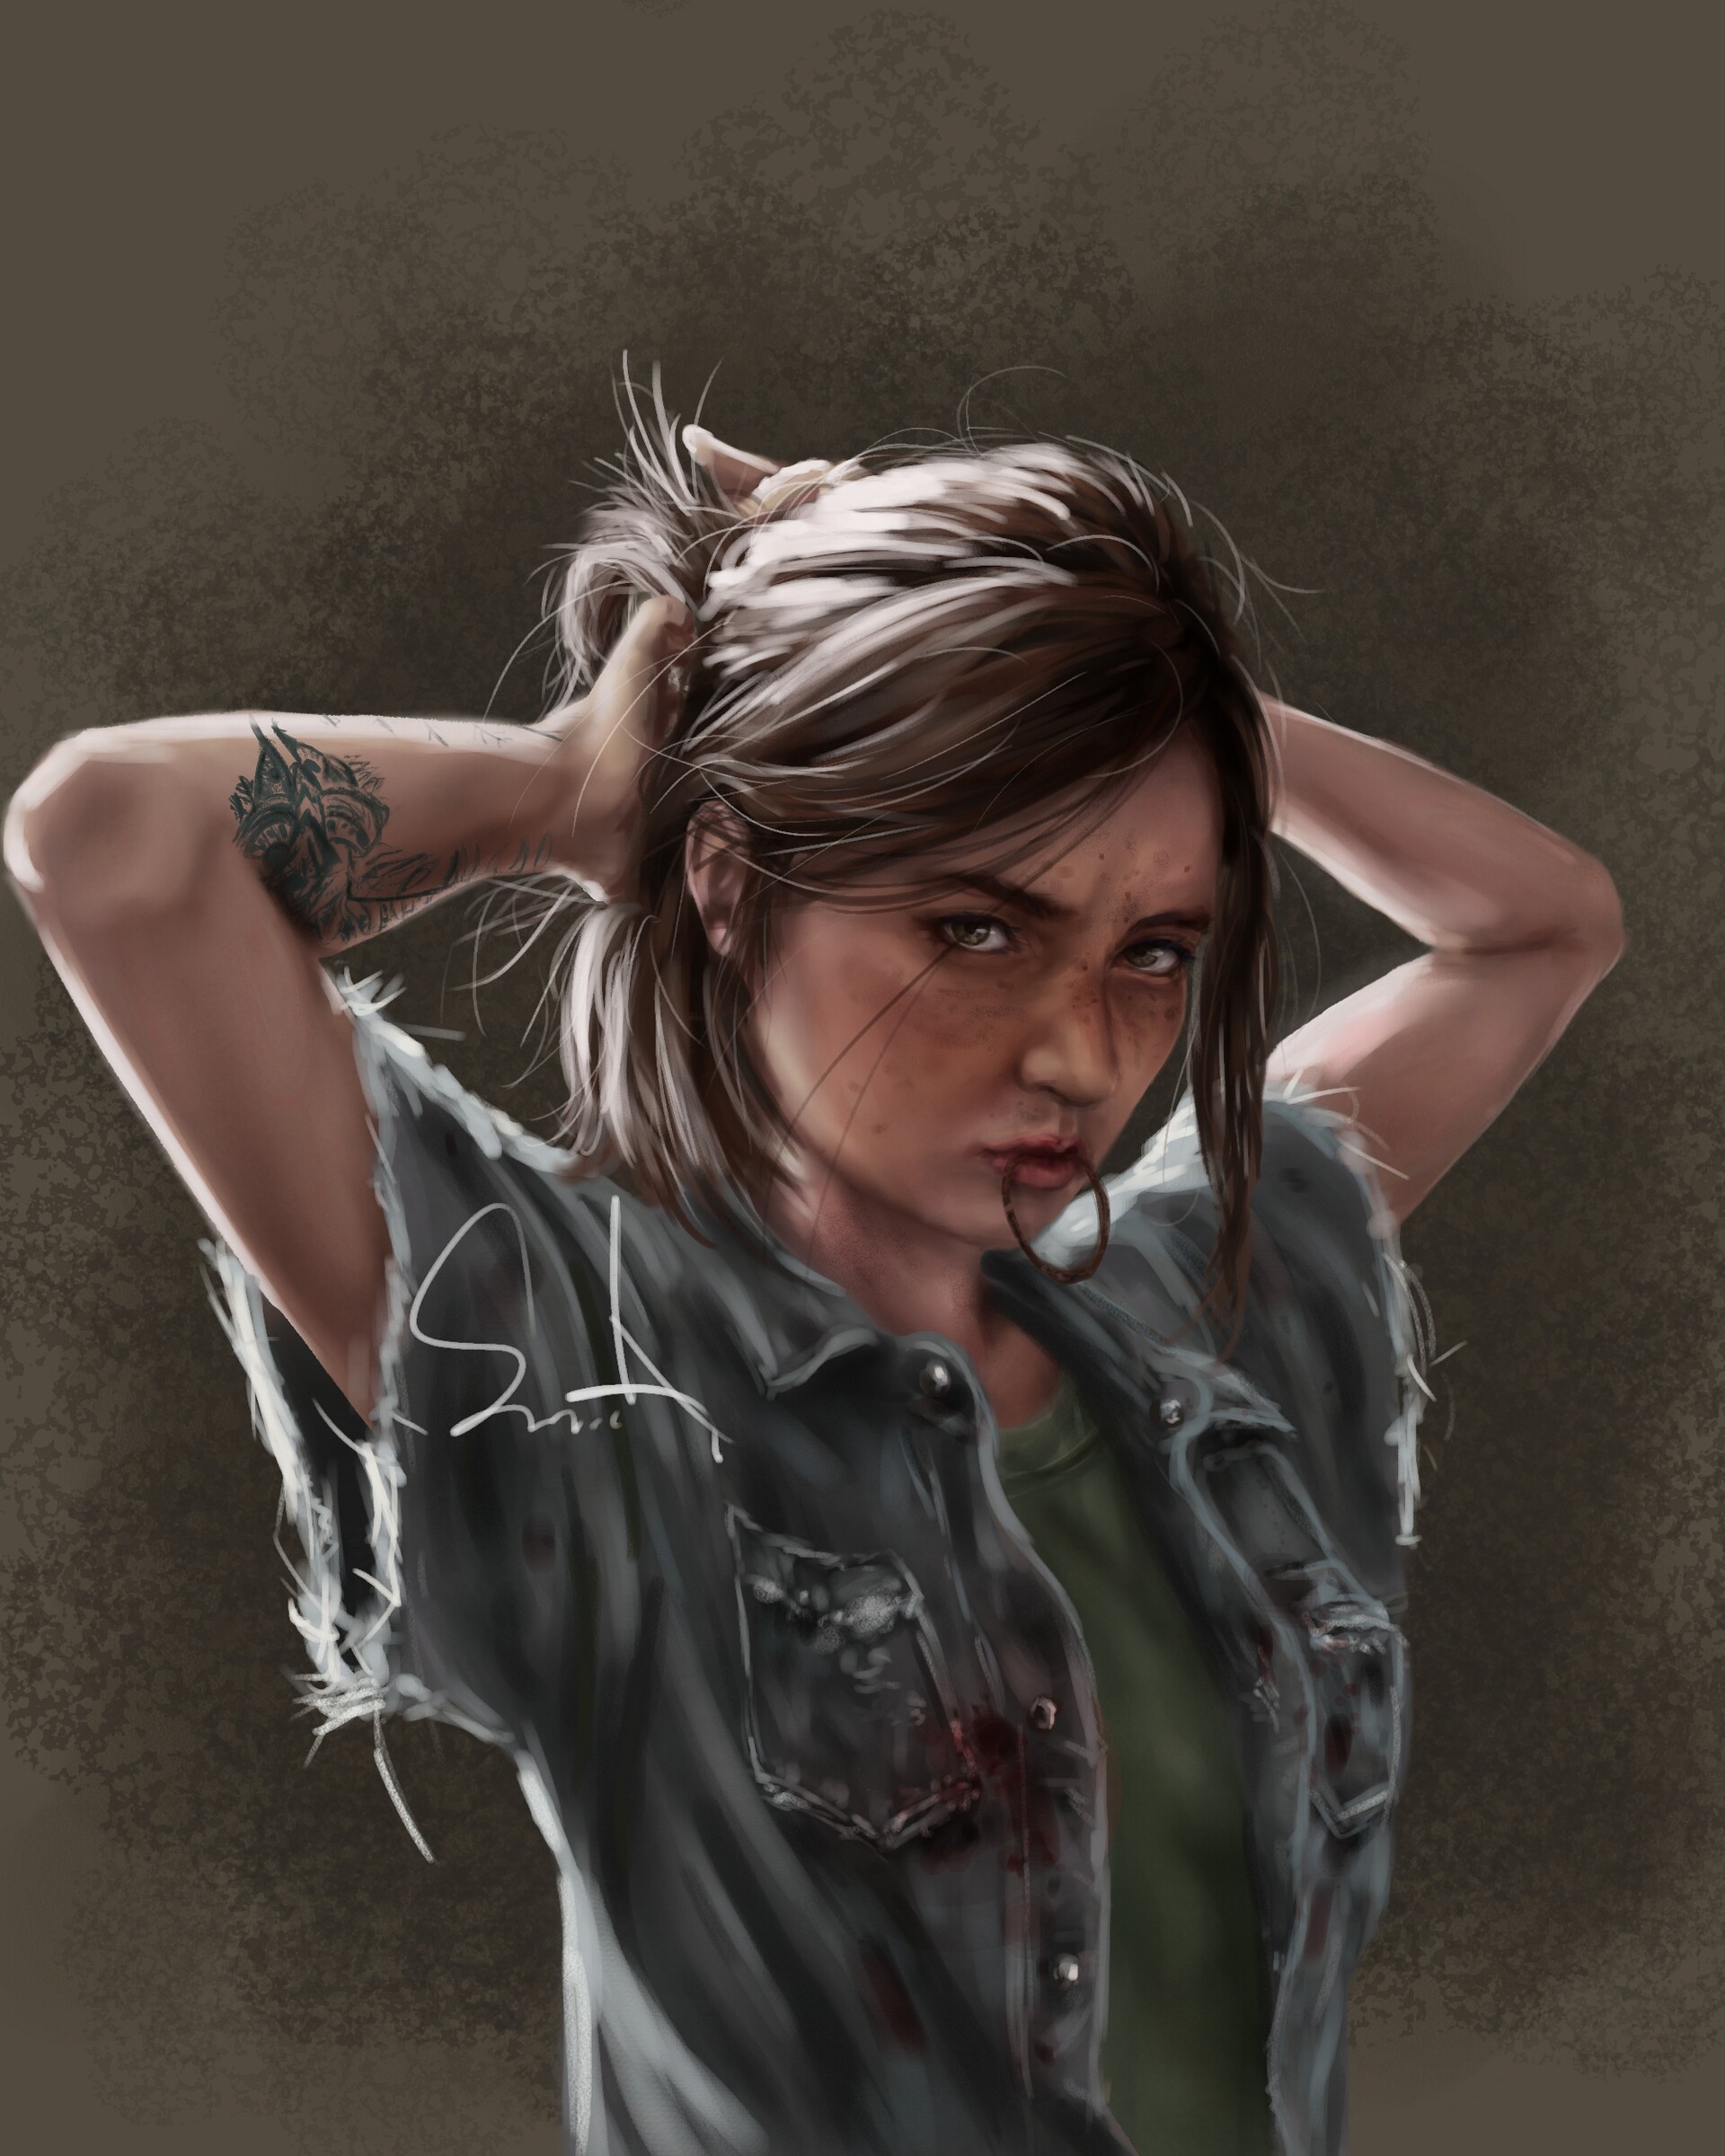 General 1920x2400 Small Alley video games video game girls artwork video game characters digital painting digital art messy hair green top hands in hair arms behind head T-shirt grey jacket looking at viewer brunette green eyes blood fictional character jacket tattoo portrait display portrait The Last of Us The Last of Us 2 fan art simple background tattoo sleeve brown background arms up video game art women ArtStation Ellie Williams Smalley inked girls